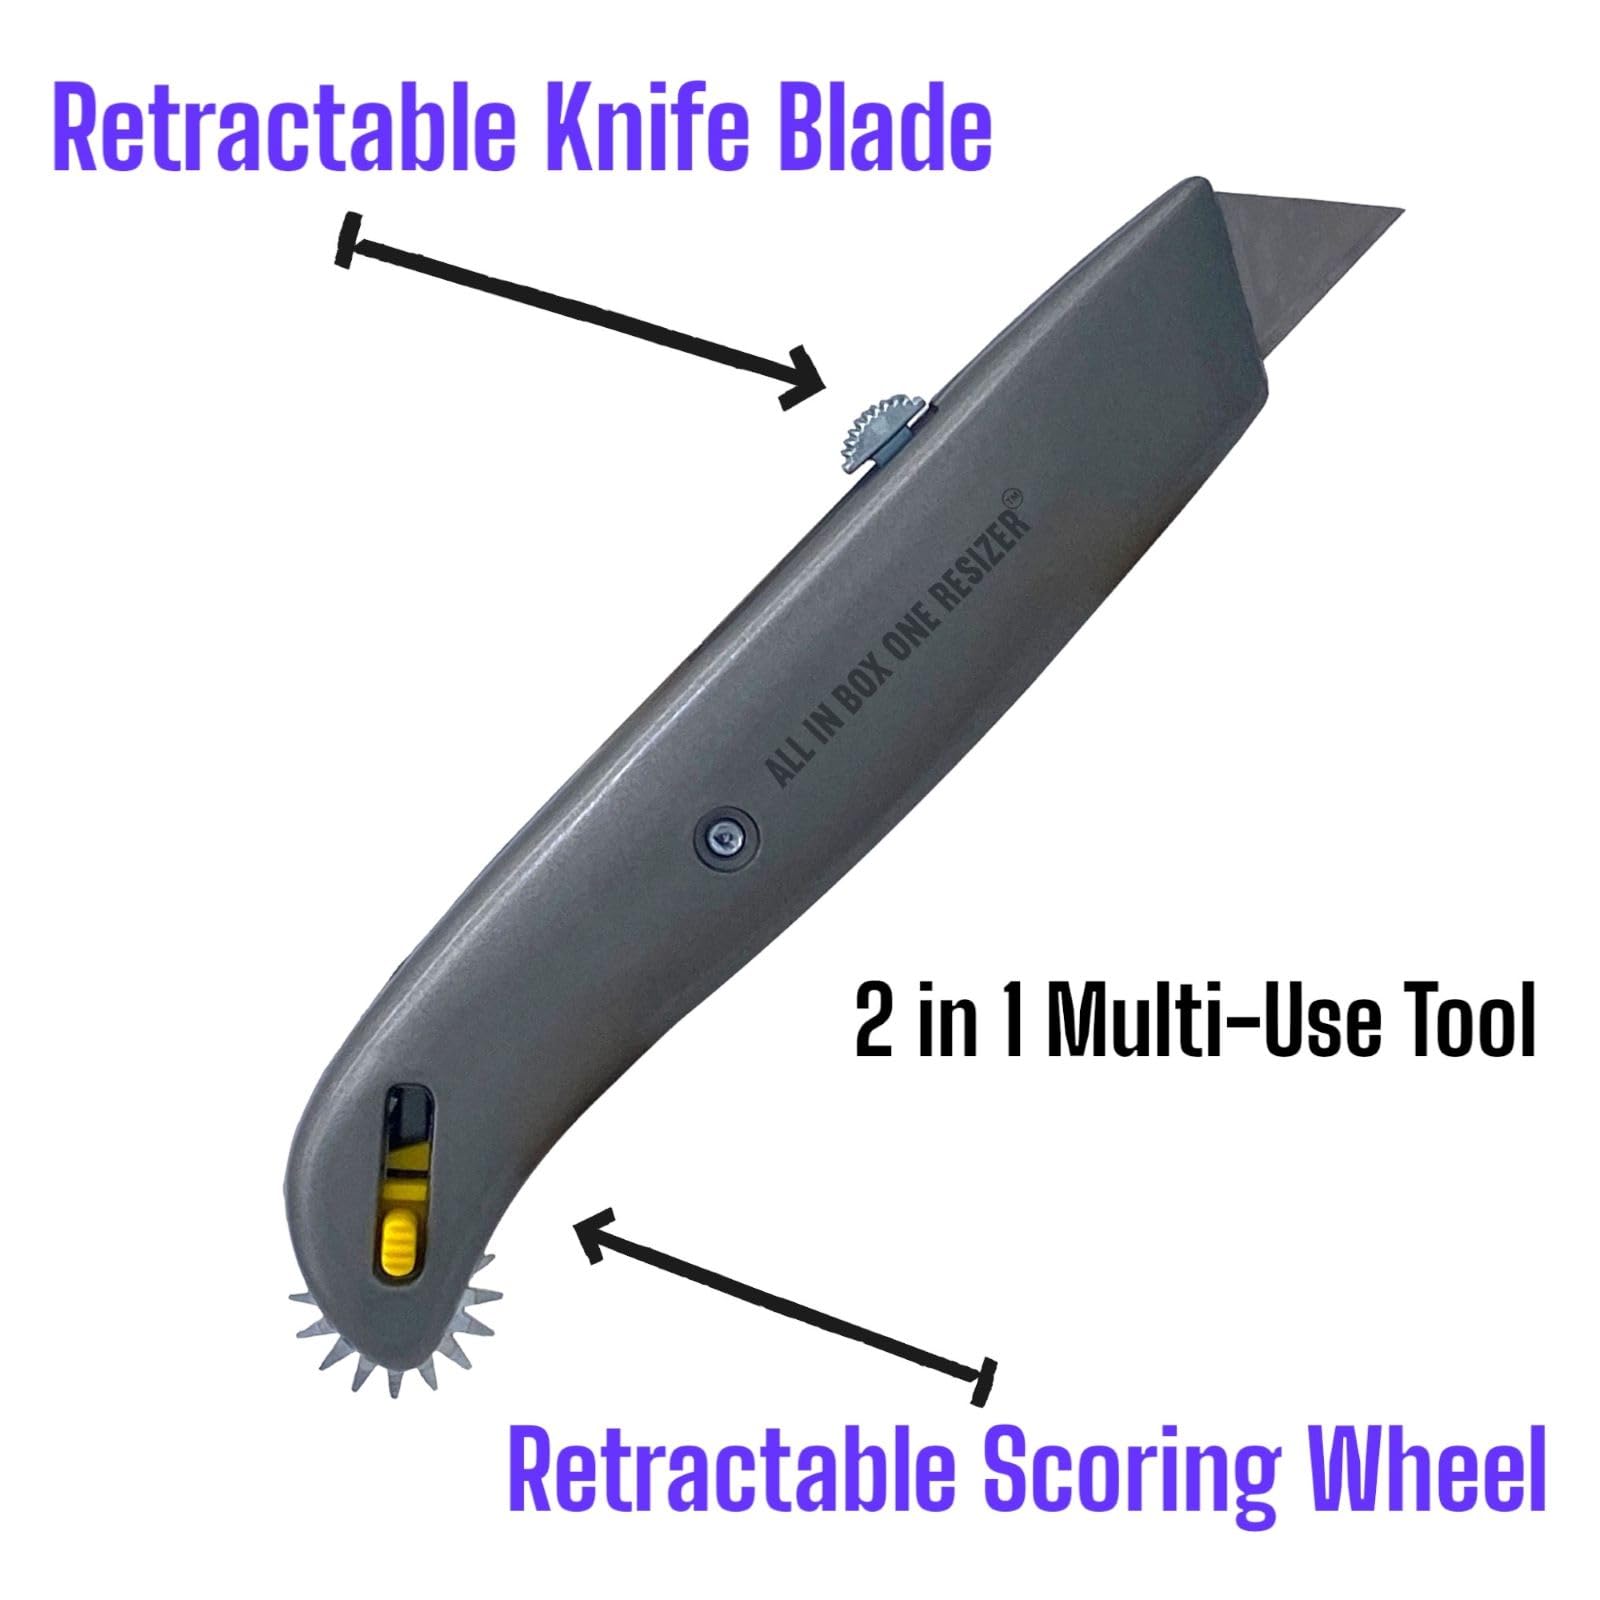 Box Resizer Tool with Scoring Wheel - Utility Knife Cardboard Scorer, Reducer - Box Cutter Sizer Tool for Resizing Reducing Size of Shipping Boxes